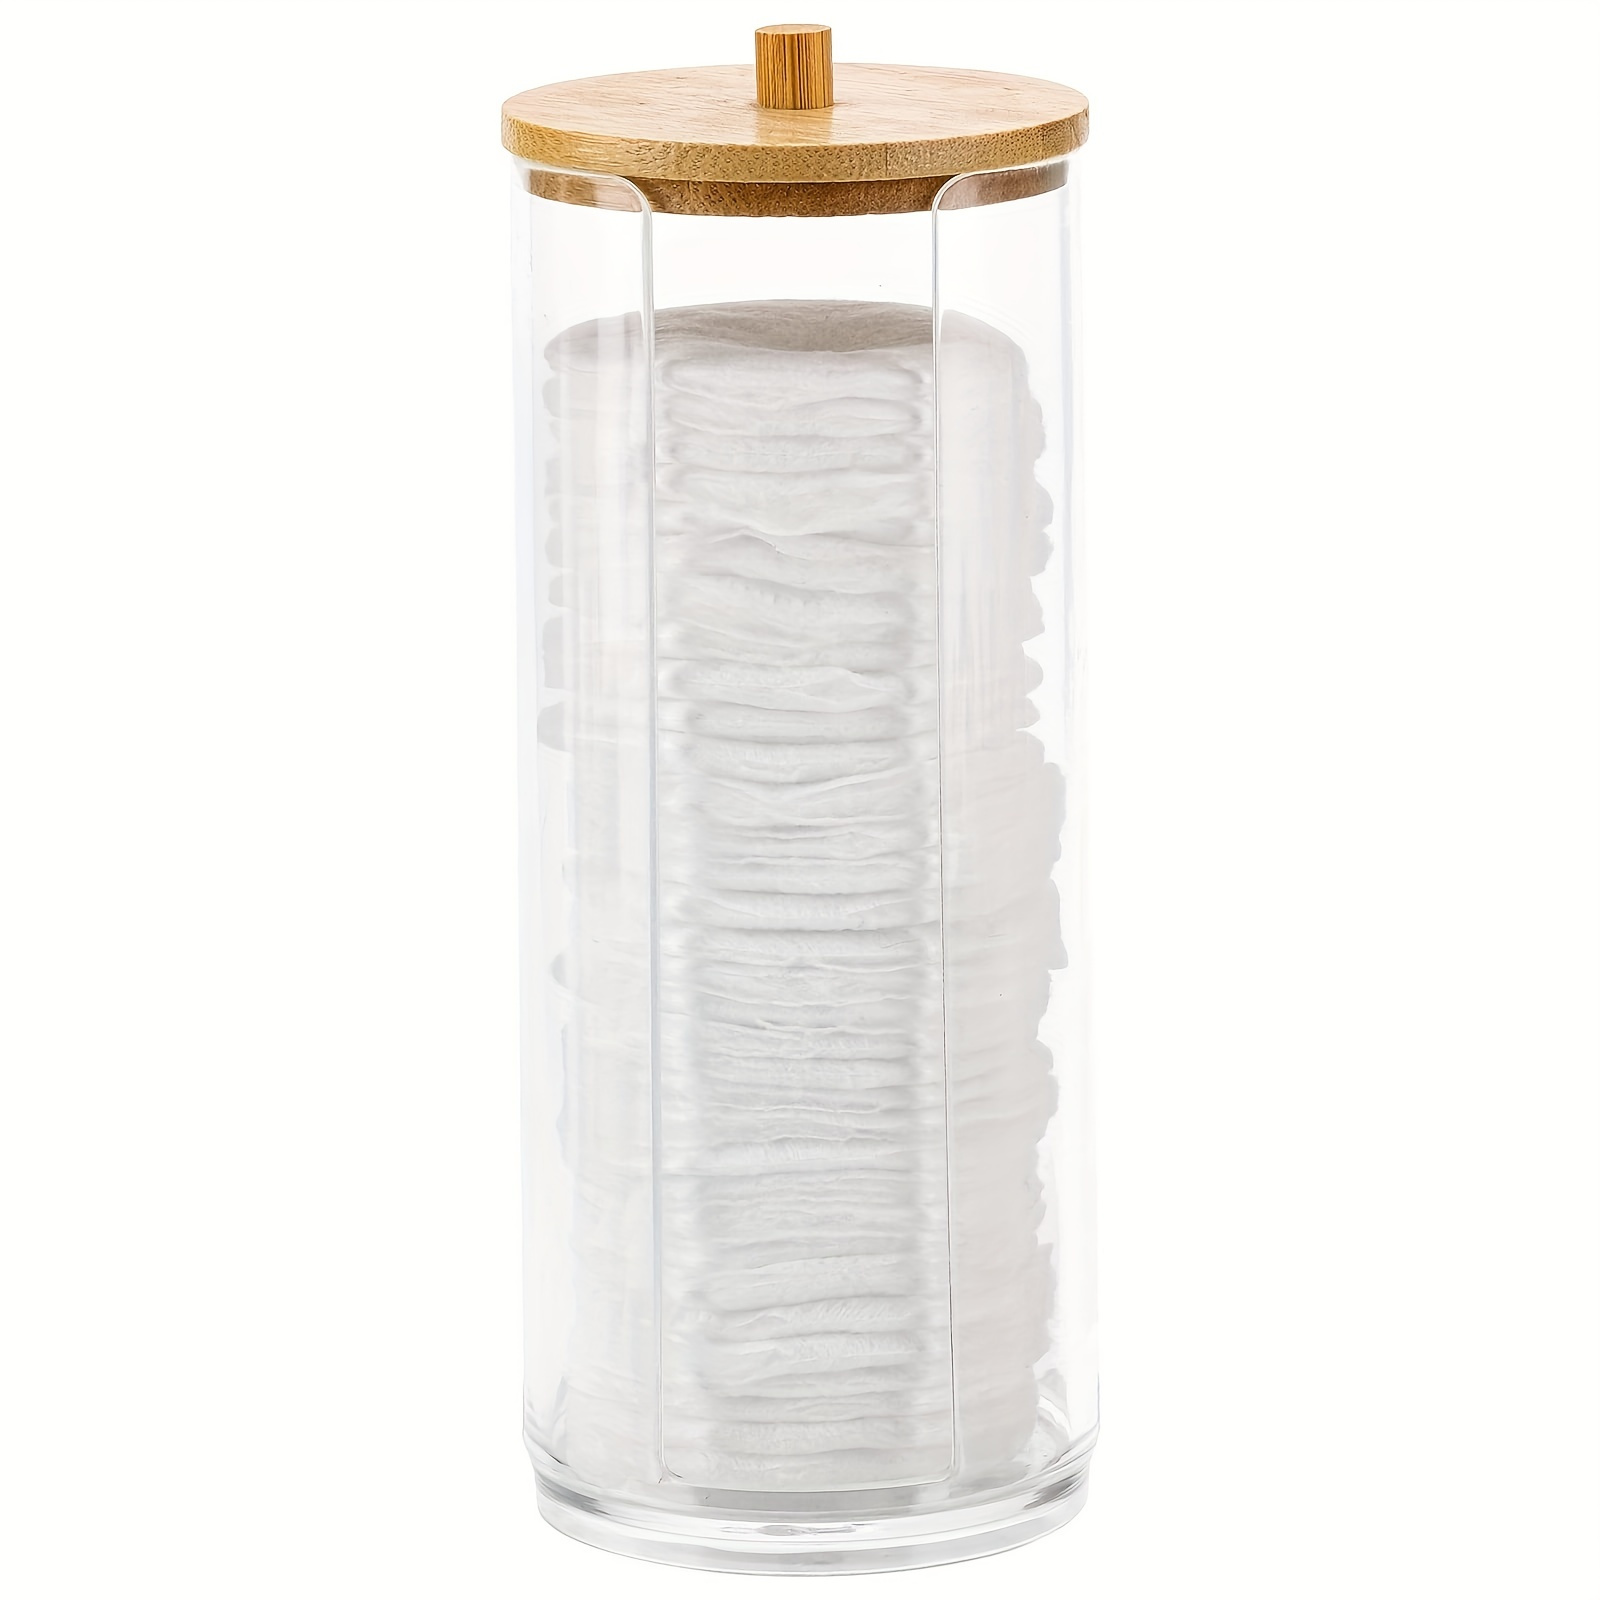 

1pc Cotton Swab Holder With Bamboo Lid Transparent Acrylic Cotton Pad Box Cosmetic Storage Container Organizer Seasoning Dispenser For Home